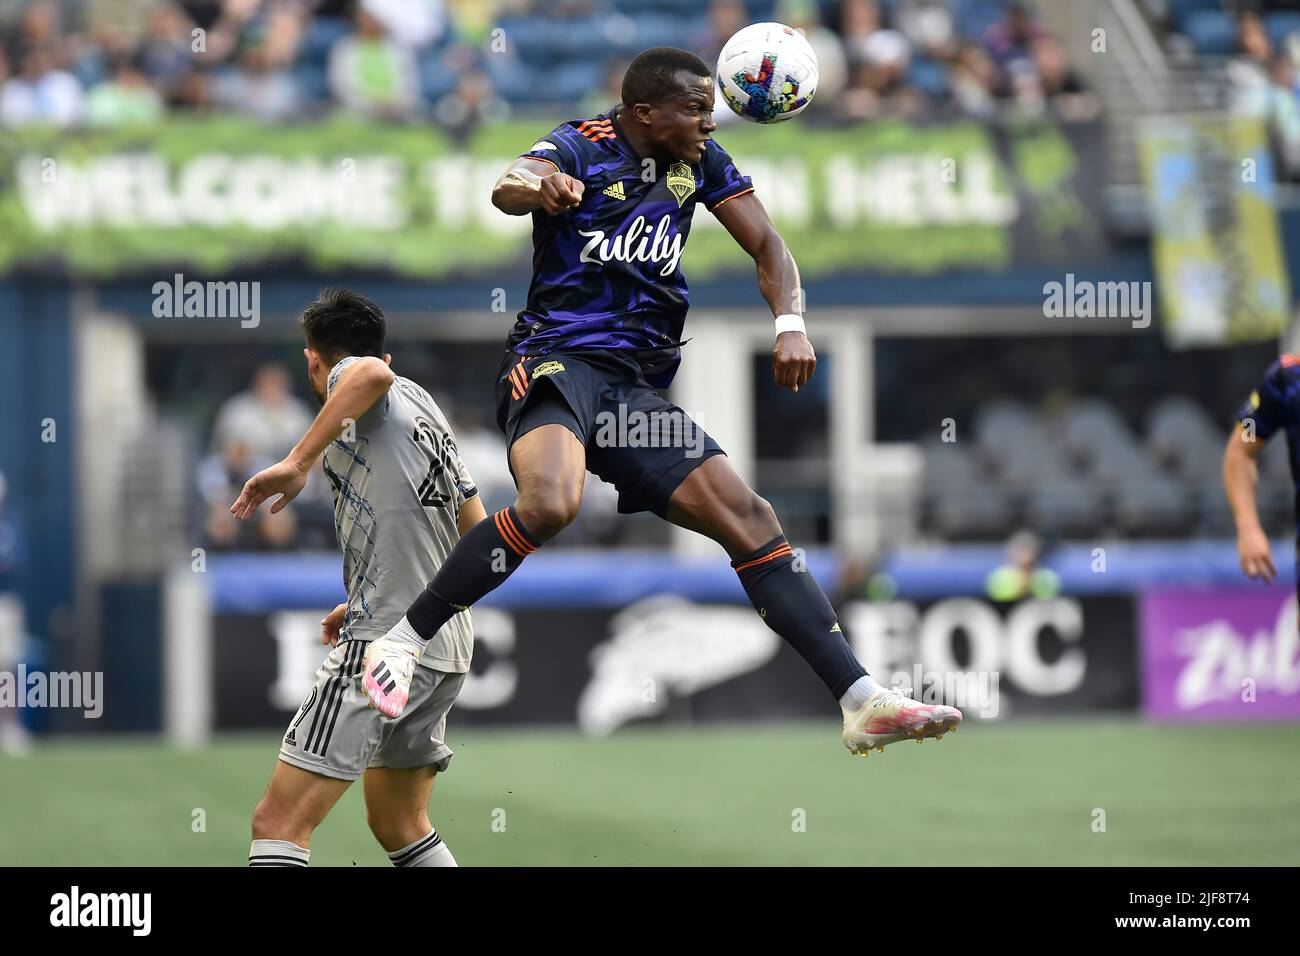 Seattle, WA, USA. 29th June, 2022. Seattle Sounders defender Nouhou Tolo in the air with a header during the MLS soccer match between CF Montreal and Seattle Sounders FC at Lumen Field in Seattle, WA. Montreal defeated Seattle 2-1. Steve Faber/CSM/Alamy Live News Stock Photo